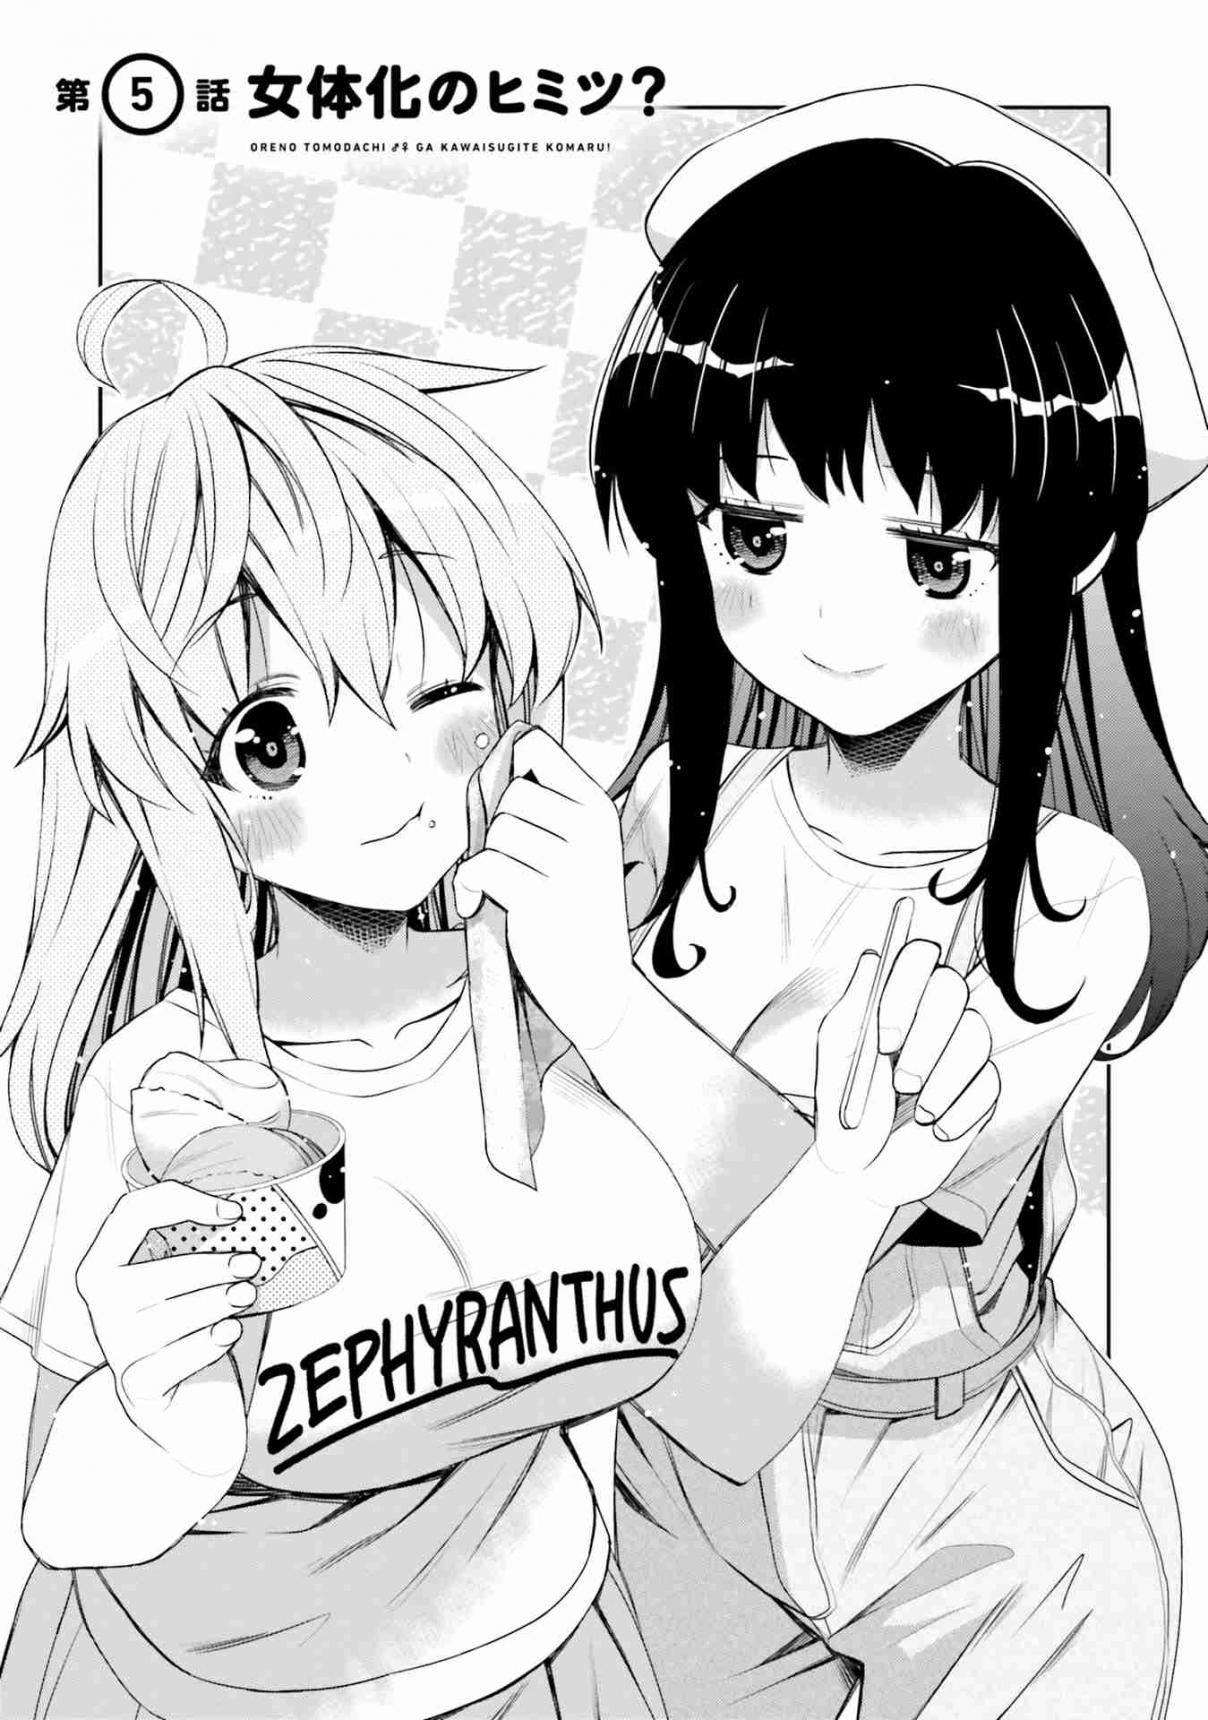 I Am Worried That My Childhood Friend Is Too Cute! Vol. 1 Ch. 5